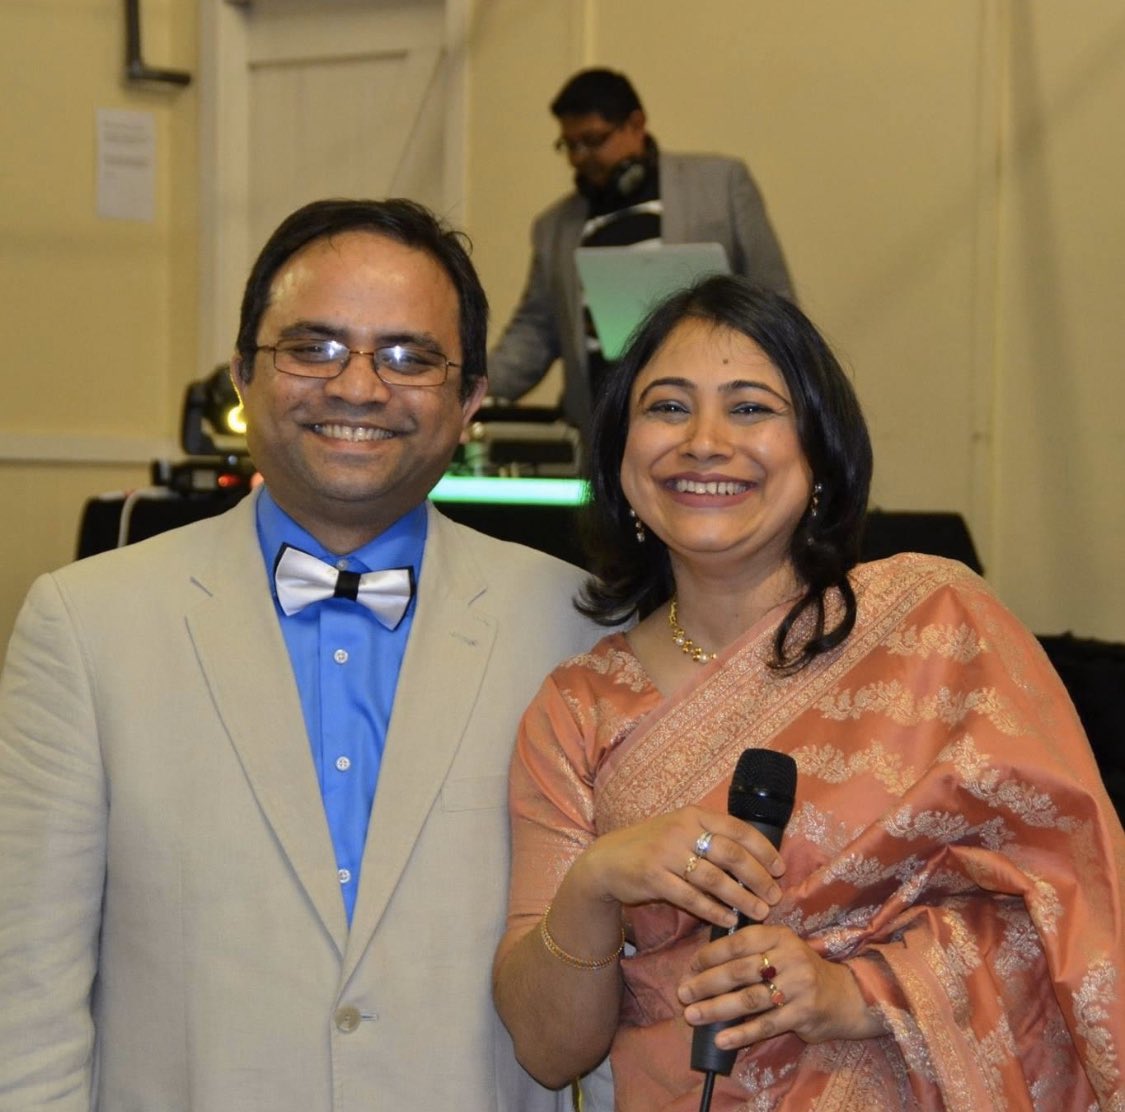 Another Muslim doctor dies in the UK from  #COVID19. Abdul Mabud Chowdhury (Faisal), born in  was just 53. He was a senior consultant in the Urology department at Romford Queen Elizabeth Hospital. He and his wife only recently celebrated their 25th anniversary. RIP.